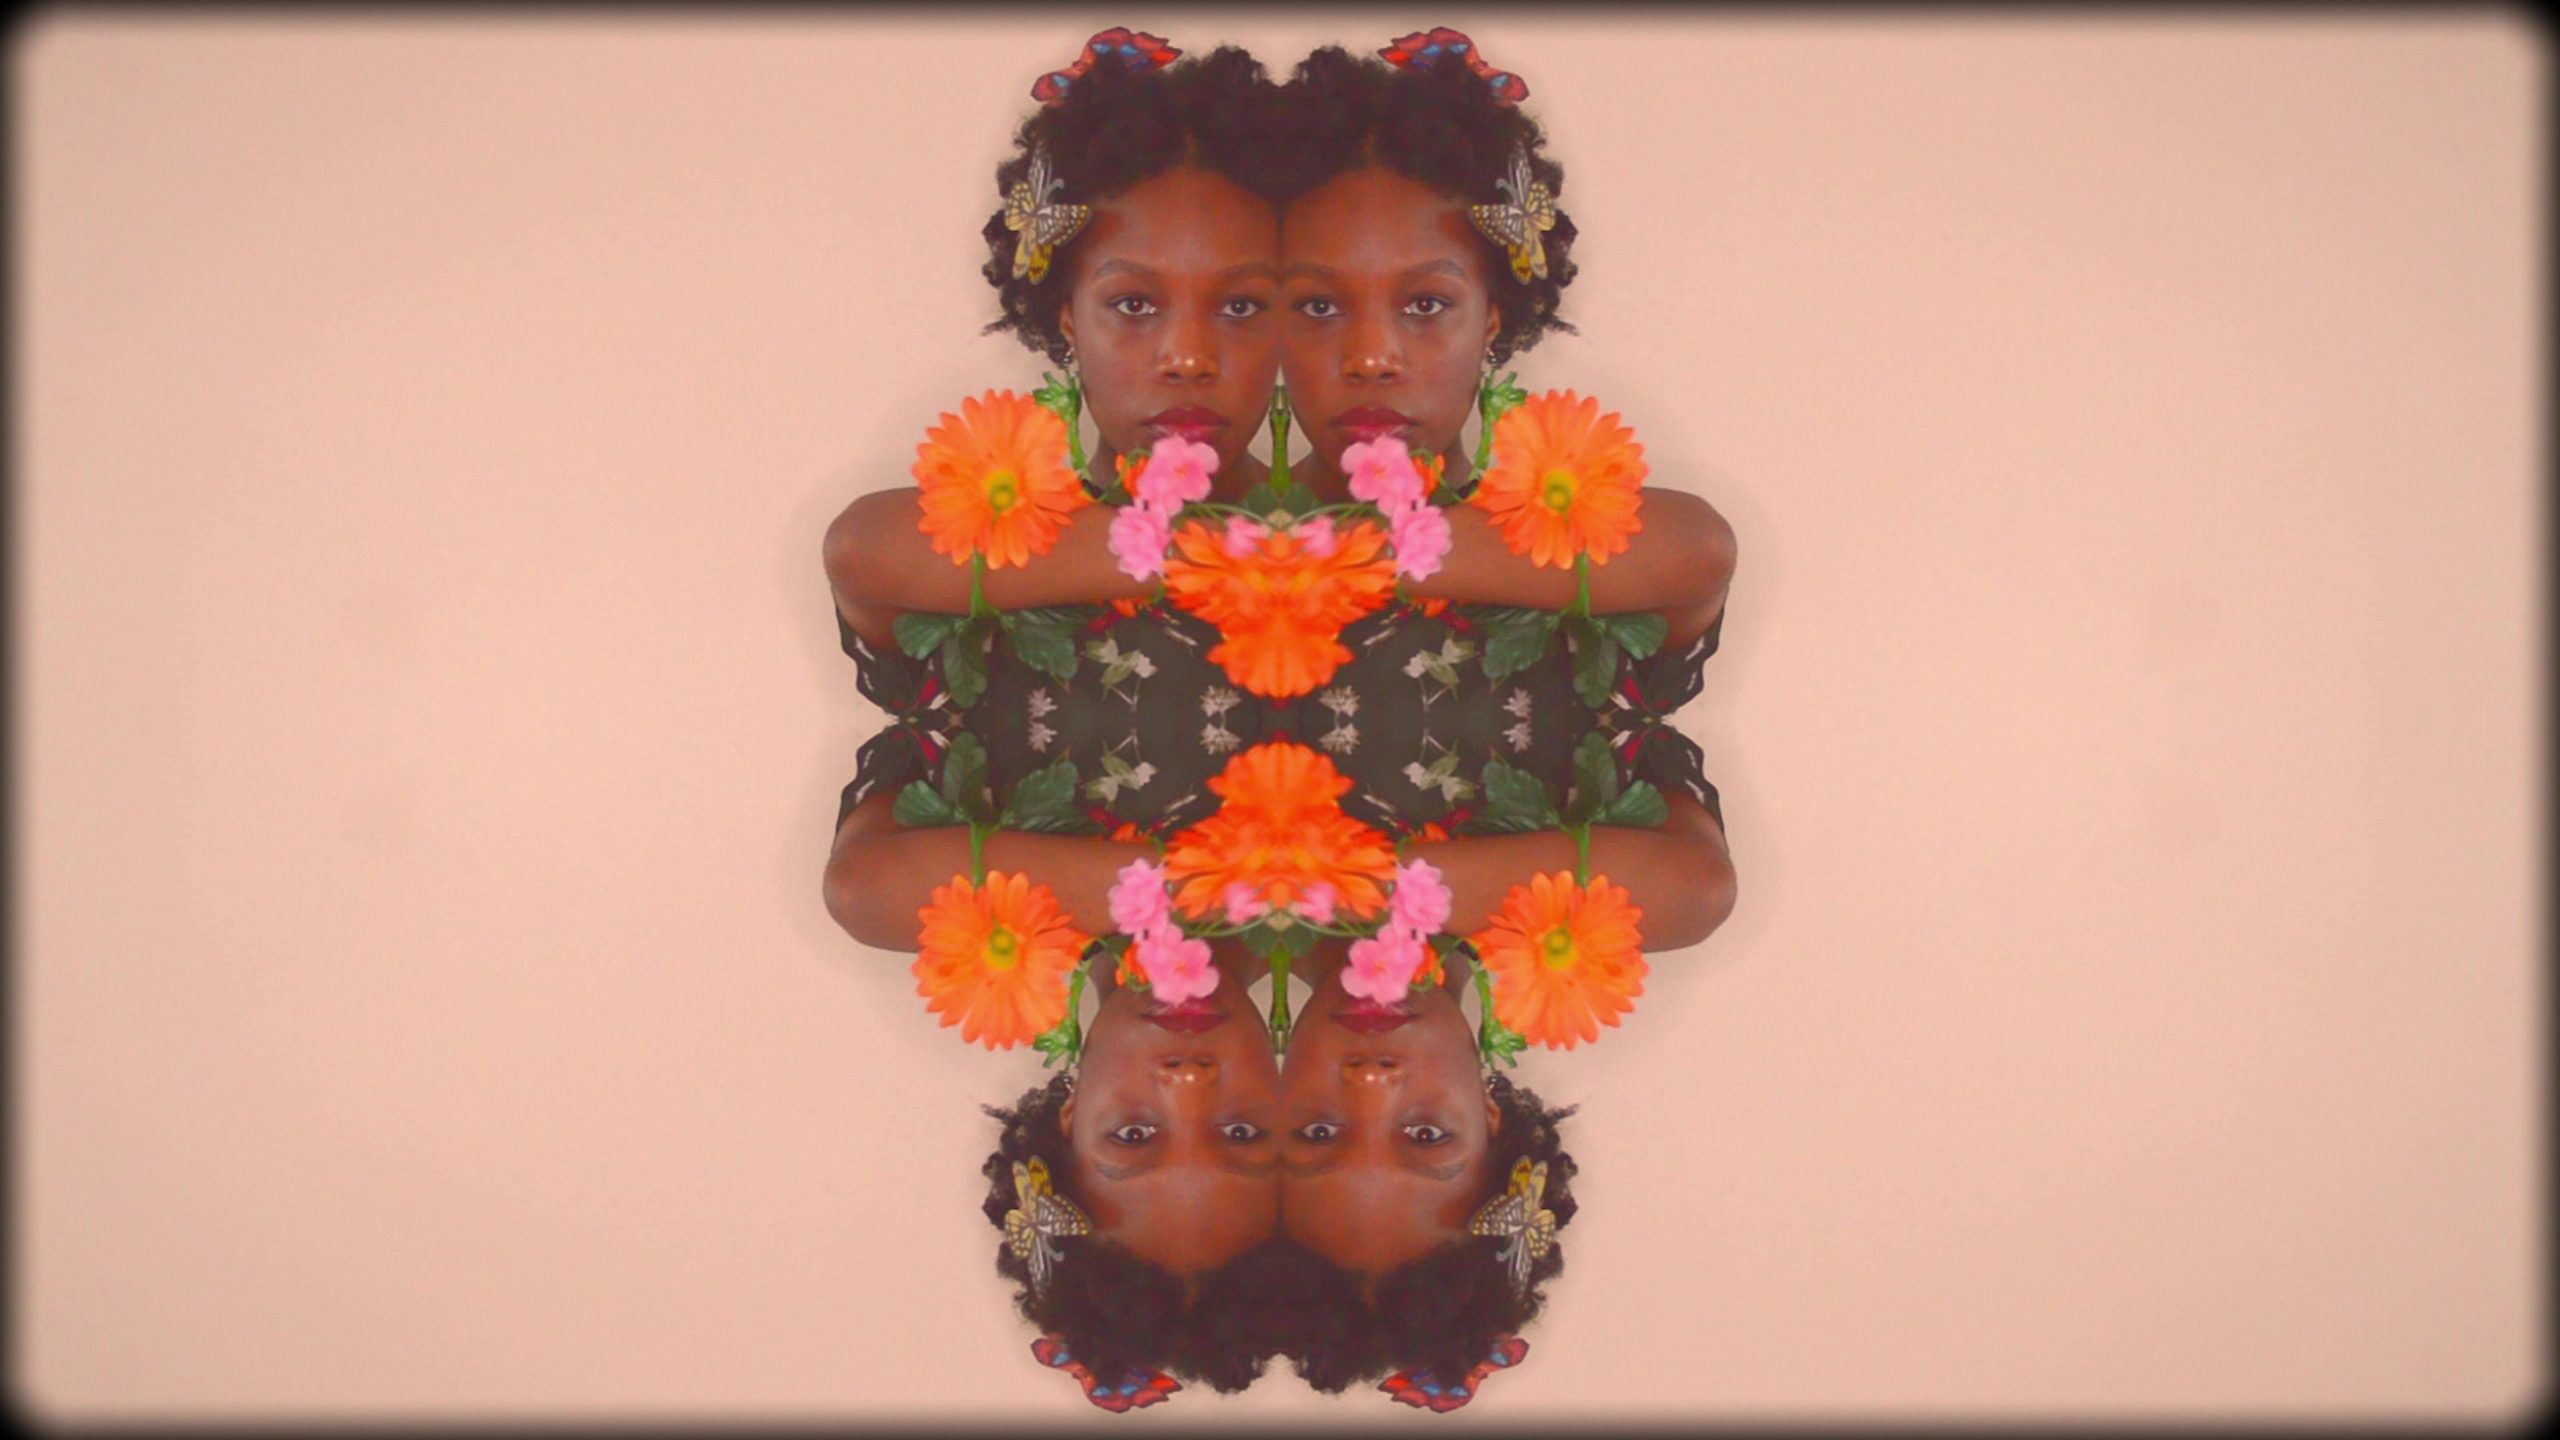 A kaleidoscopic portrait depicting a Black woman with butterflies in her hair and flowers in her clothes gazing directly at the viewer.